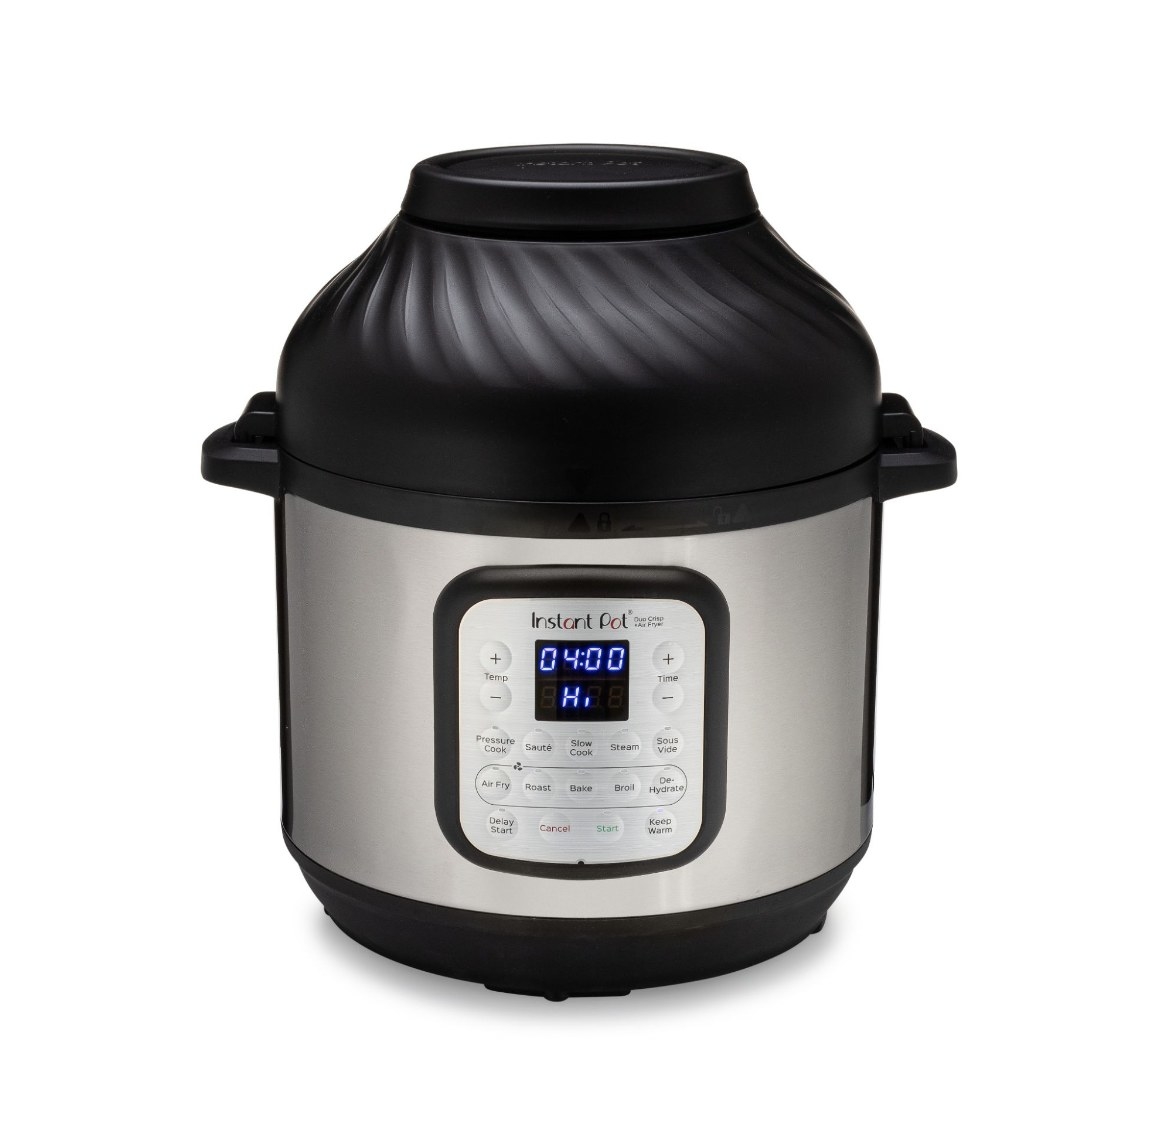 The instant pot with an air fryer lid